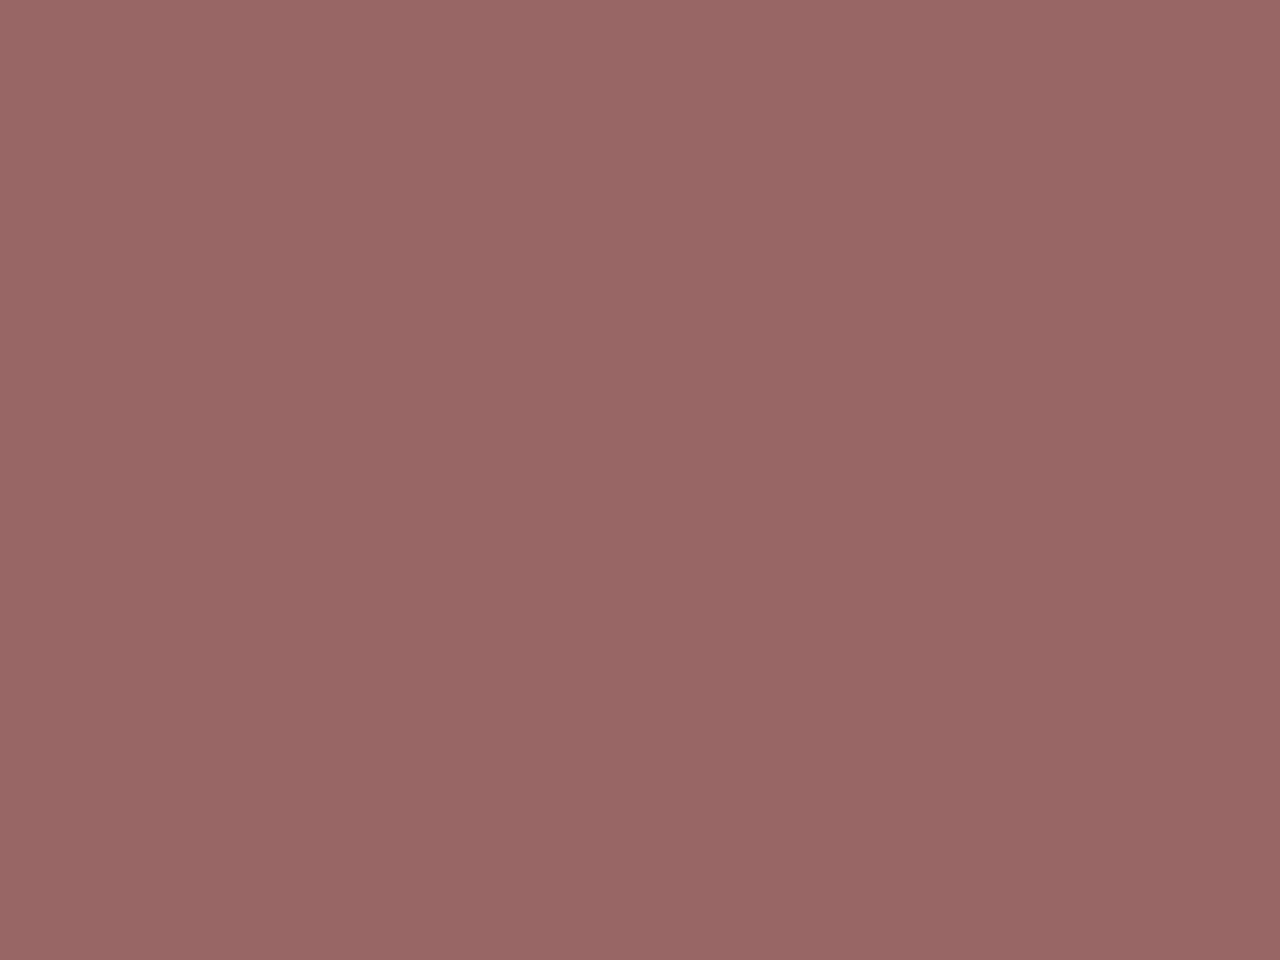 1280x960 Copper Rose Solid Color Background